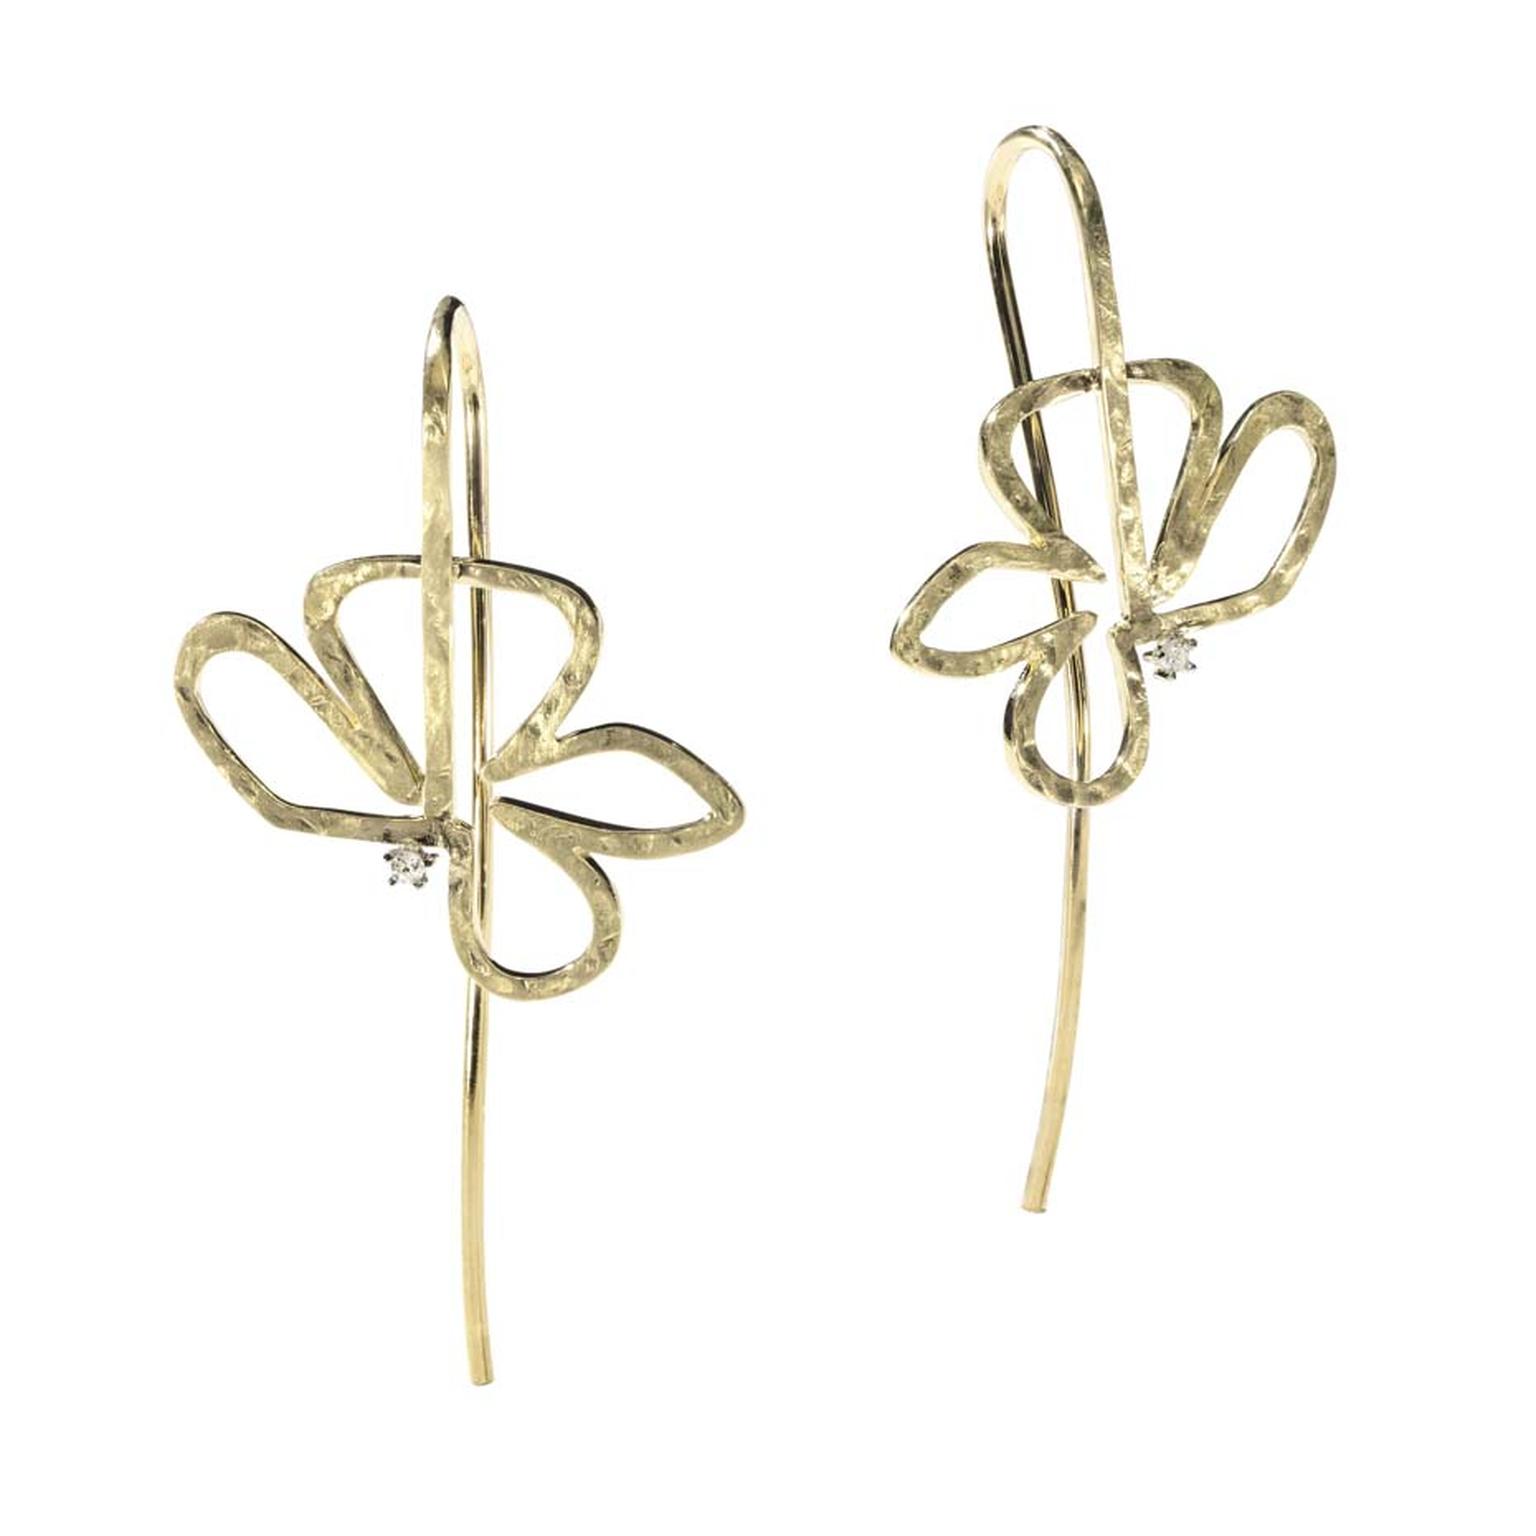 H.Stern's 2014 Oscar Niemeyer collection gold earrings featuring one diamond each displays a hollow flower design, representing Niemeyer’s love of empty spaces.